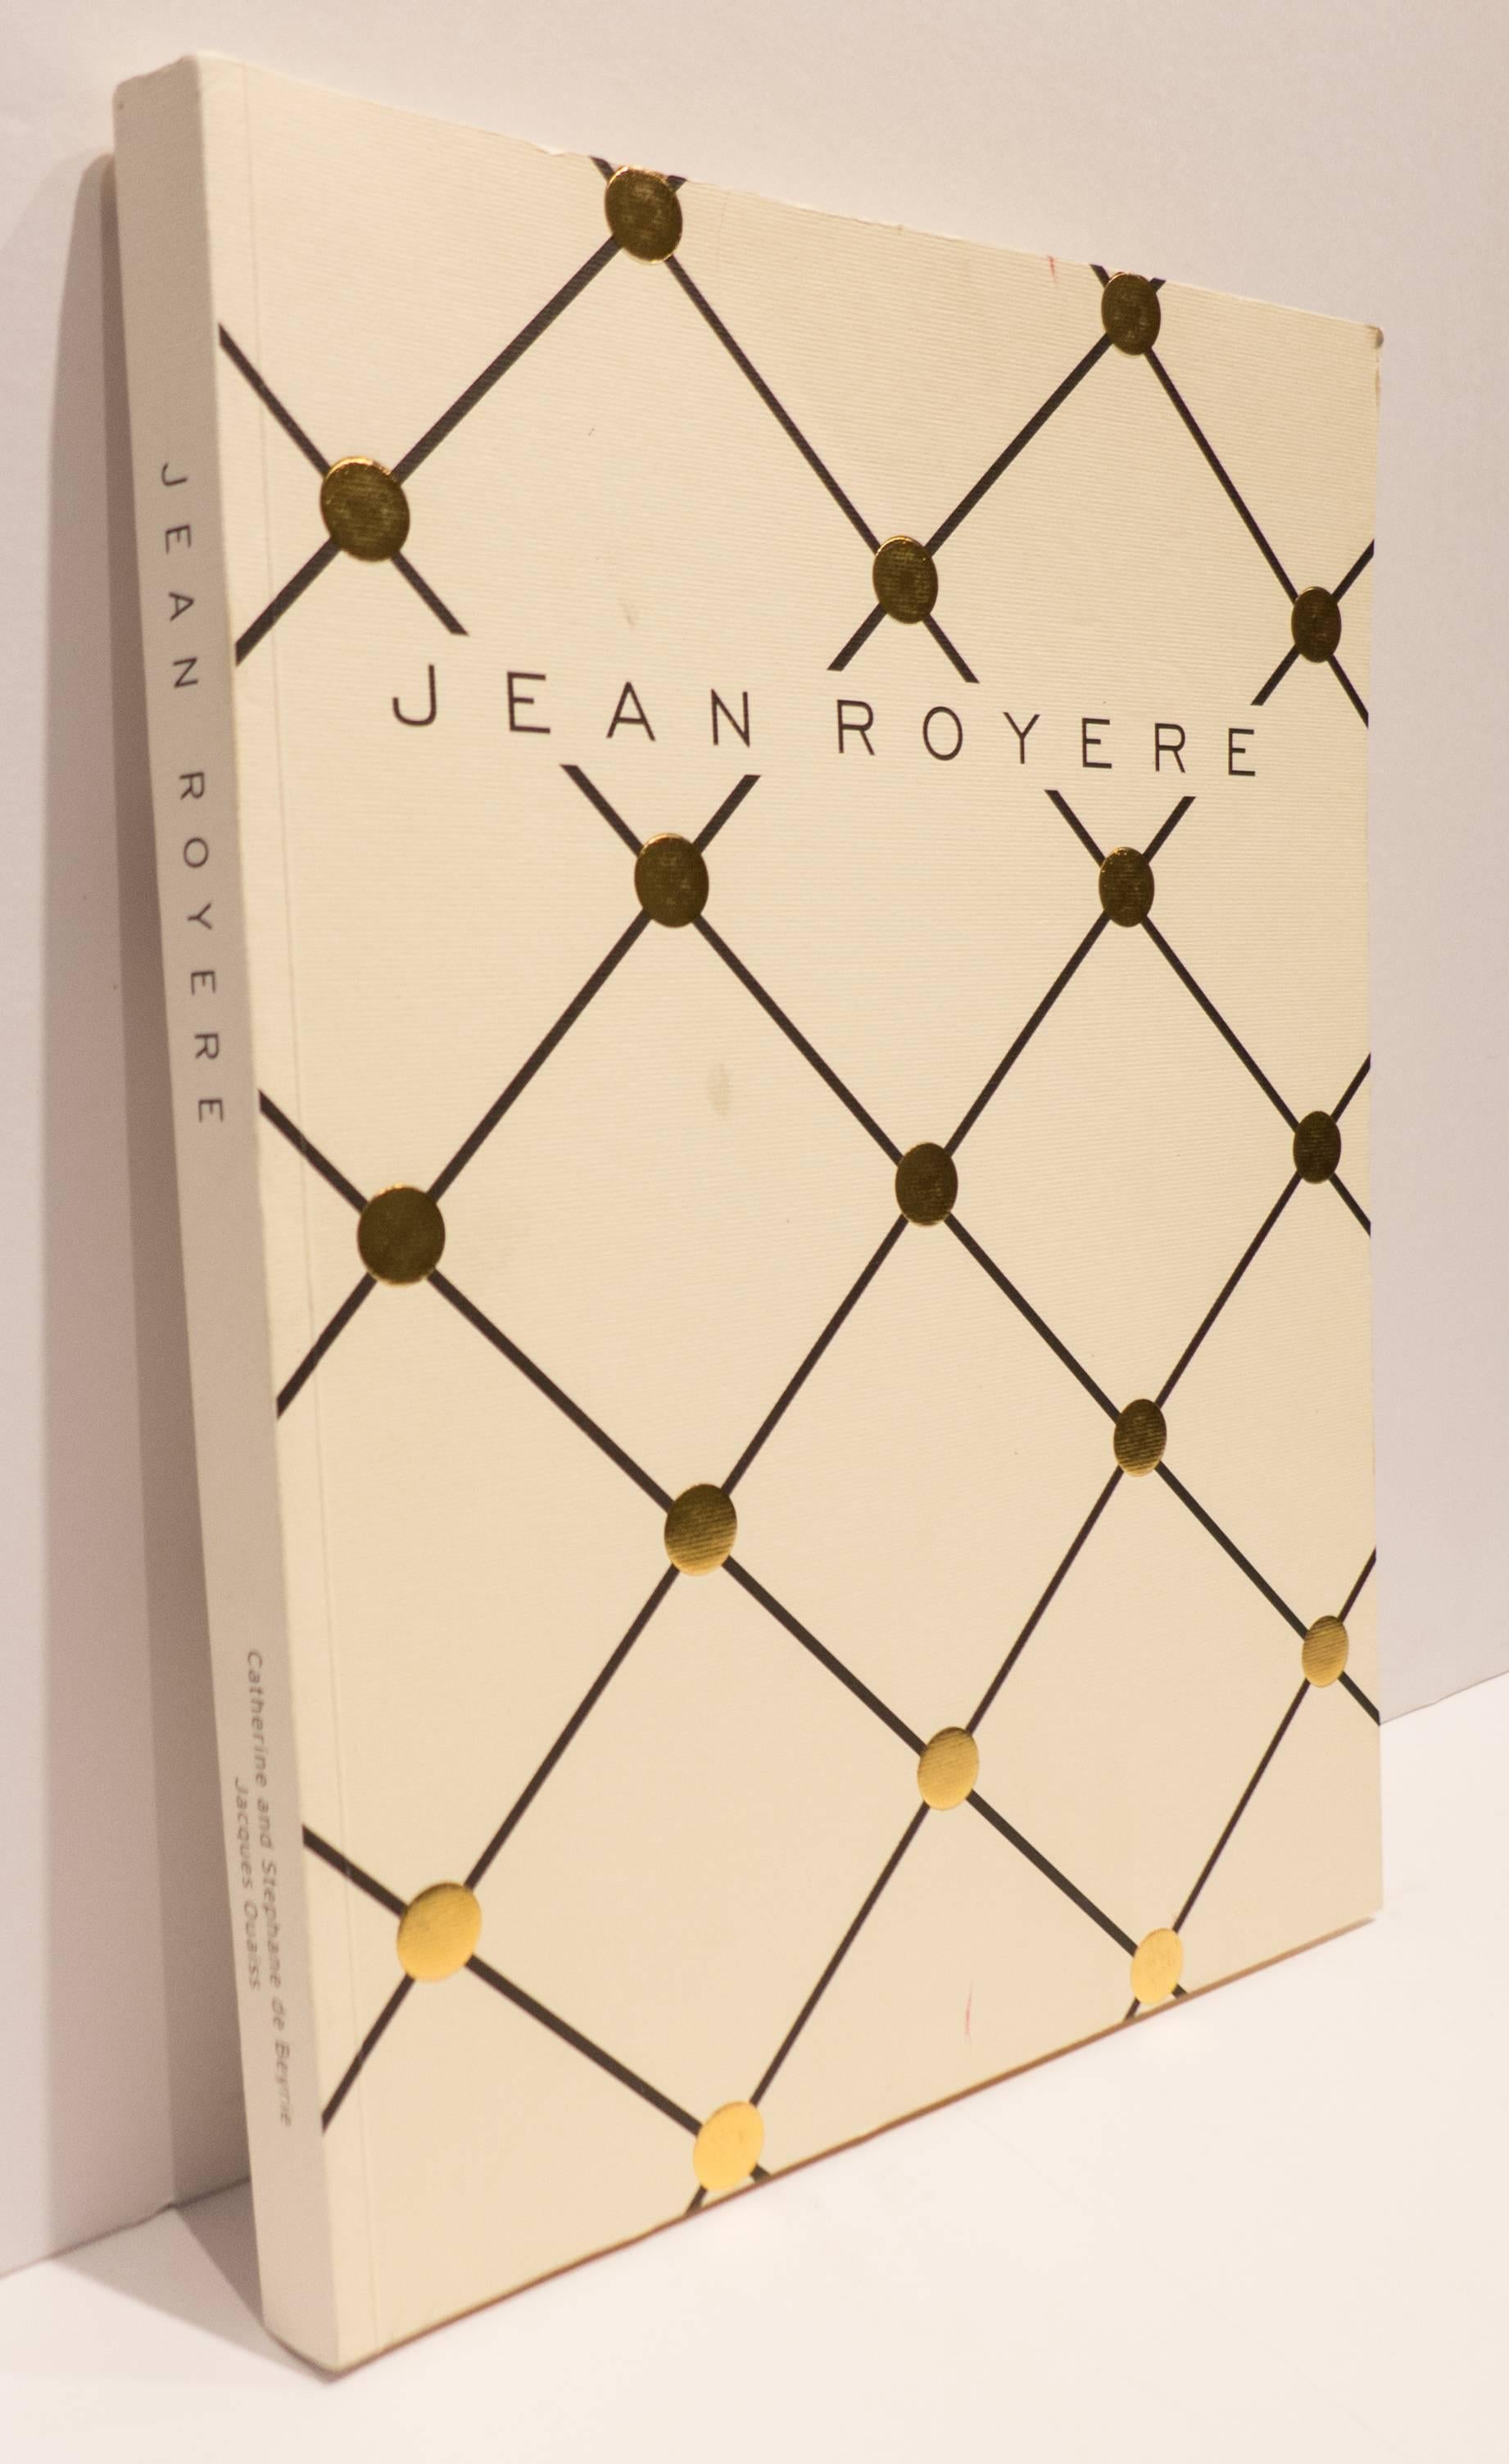 Scarce soft cover book, in English, showcasing the work of renowned French designer Jean Royere. 144 pages, many with full-color illustrations of Royere works divided into four sections: Metalwork; Sculptural furniture; Upholstered seating; and wood